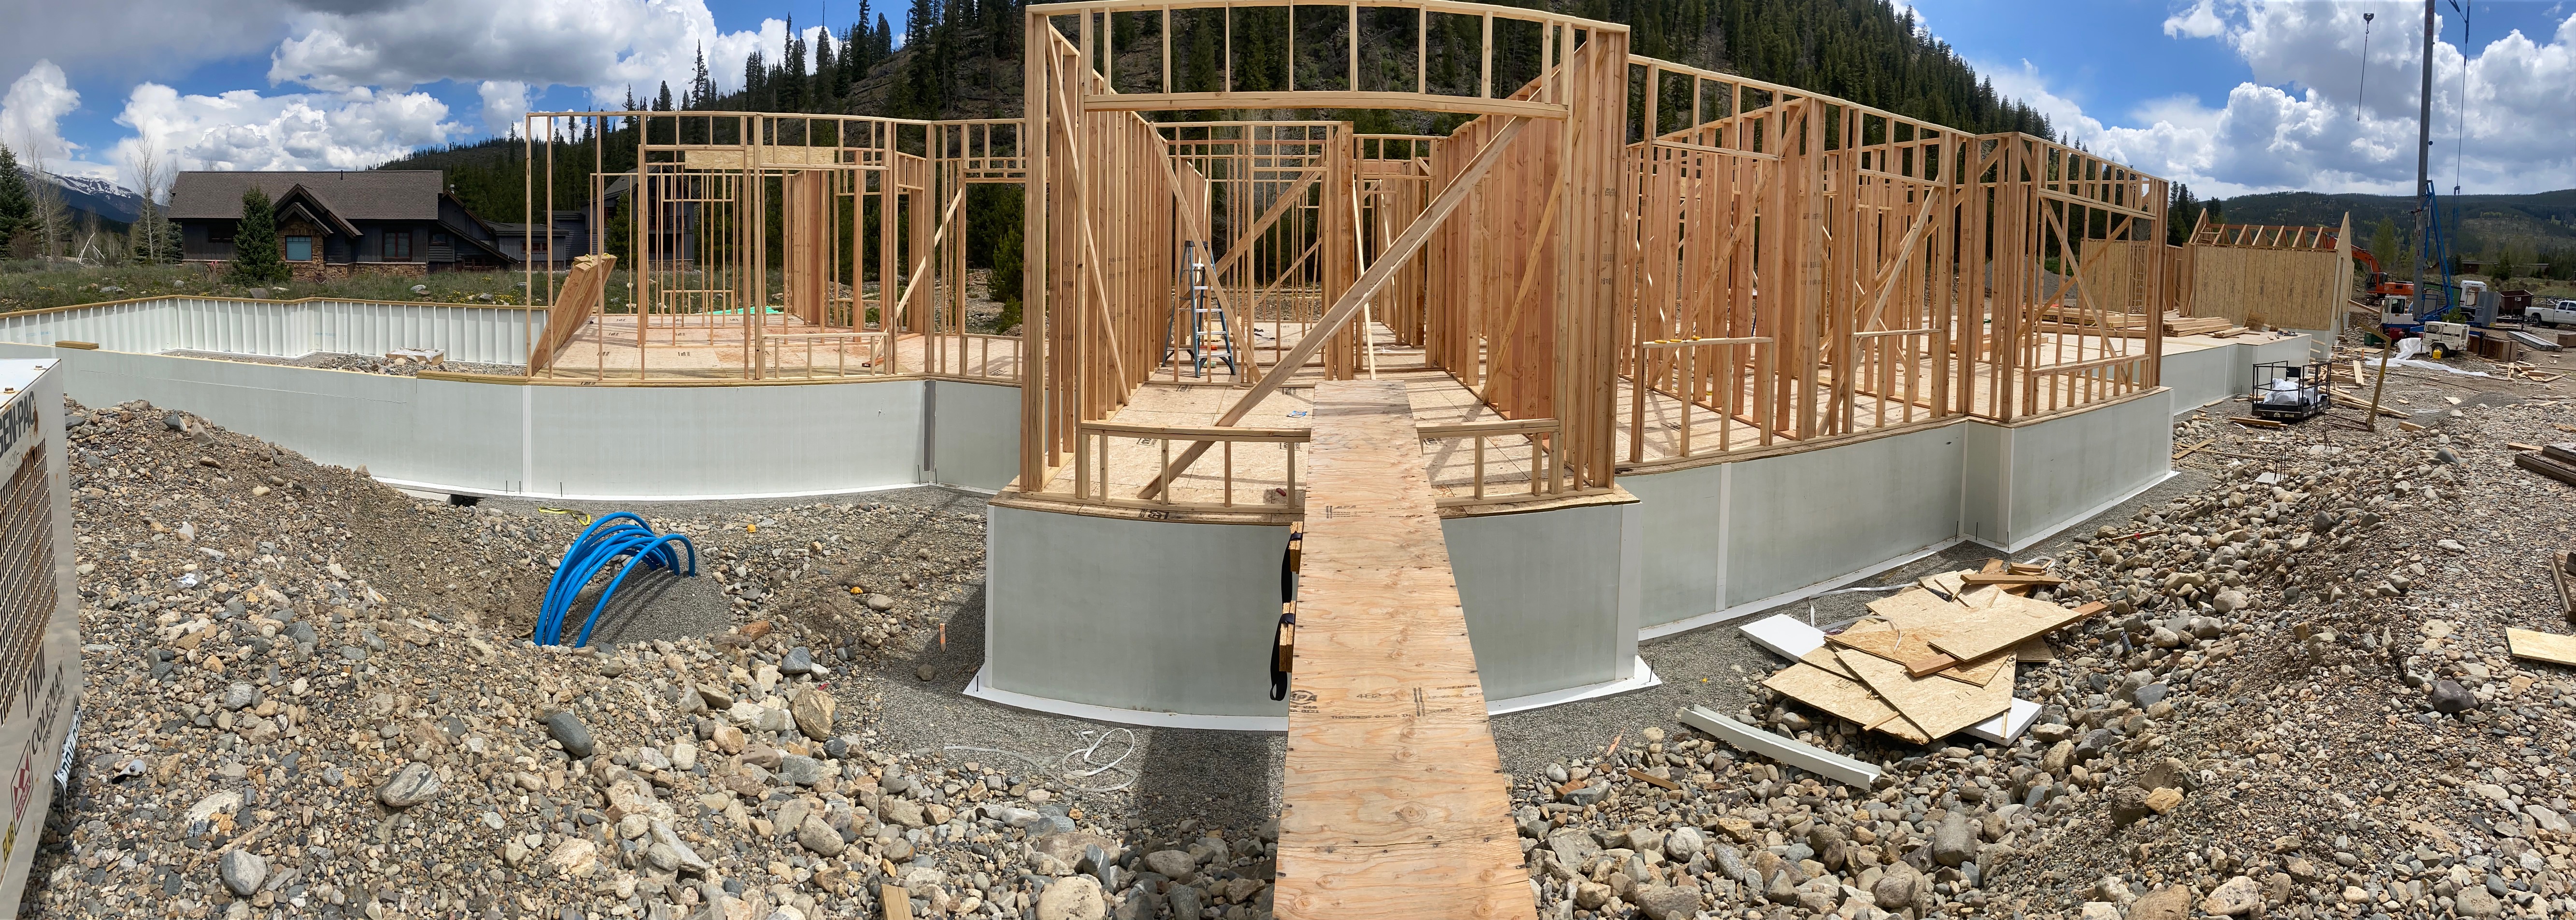 Reducing embodied carbon and curbing installation time to five days, Thrive used an innovative fiberglass foundation system instead of concrete. Photo courtesy of Thrive Home Builders.